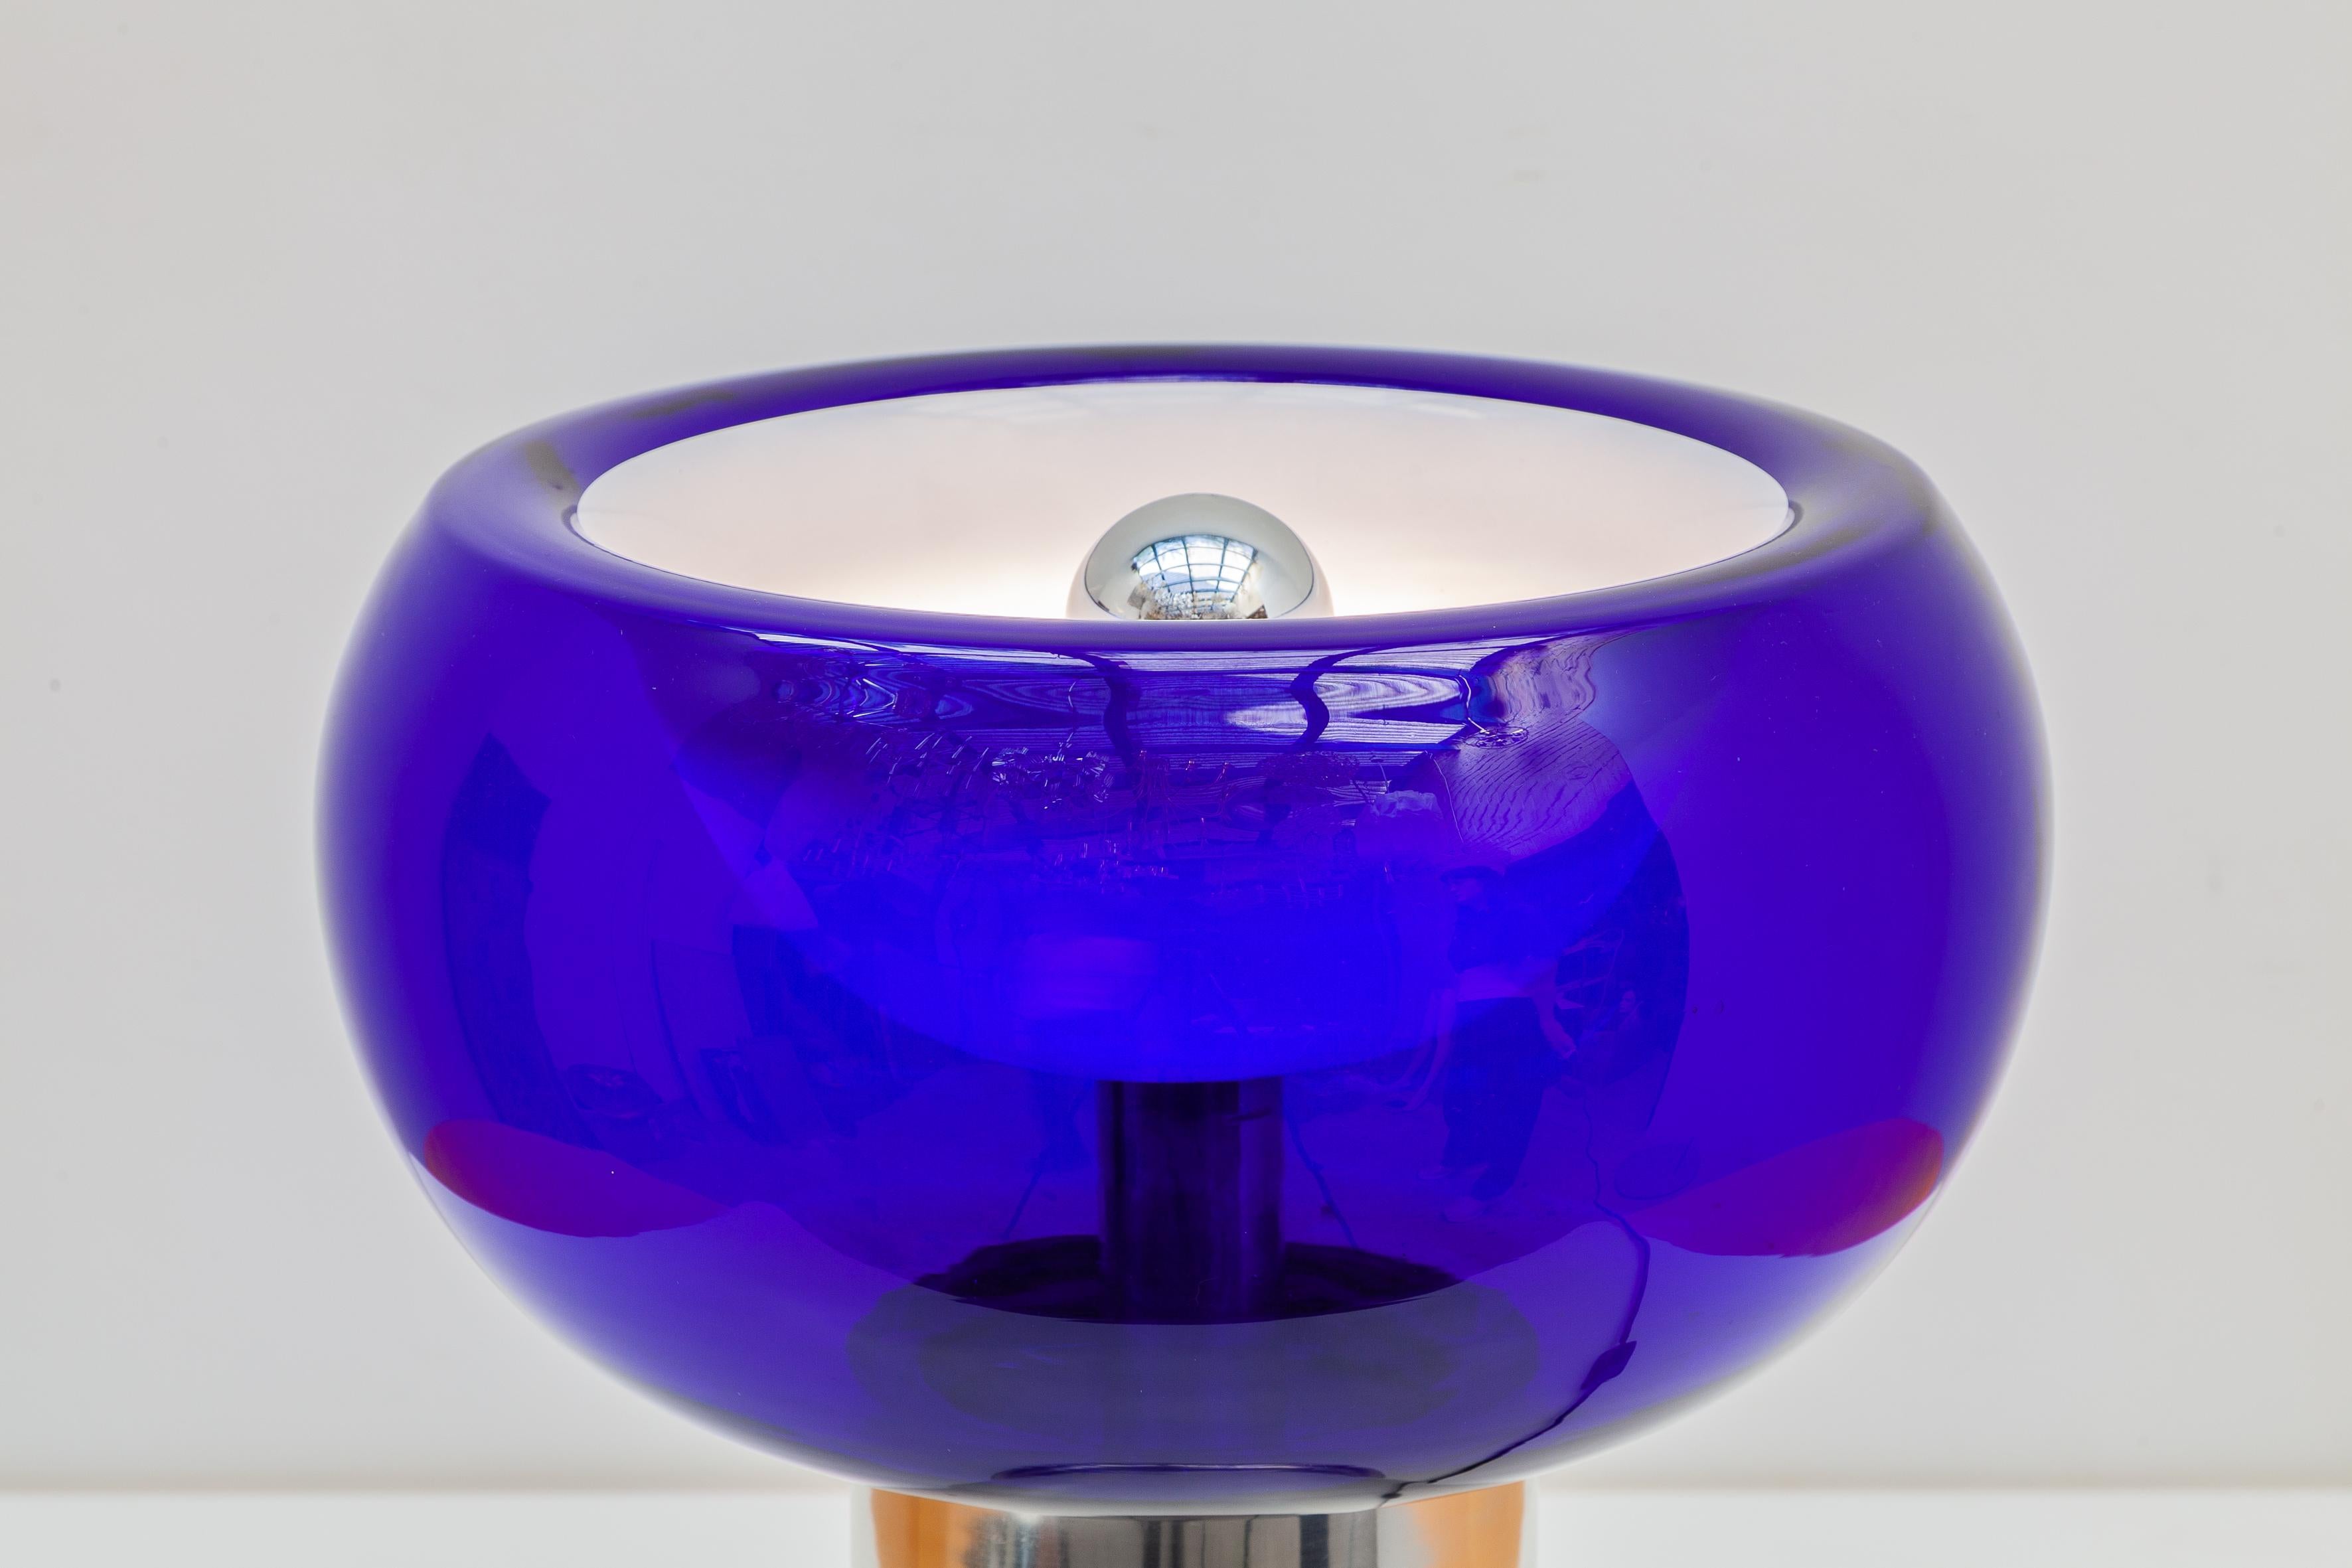 Mid-Century Modern 1970s table lamp designed by Doria, Germany. Bulb shade in blue glass with tubular chrome base with a metal lacquering shade inside and lit with one bulb that beautifully reflects the light.